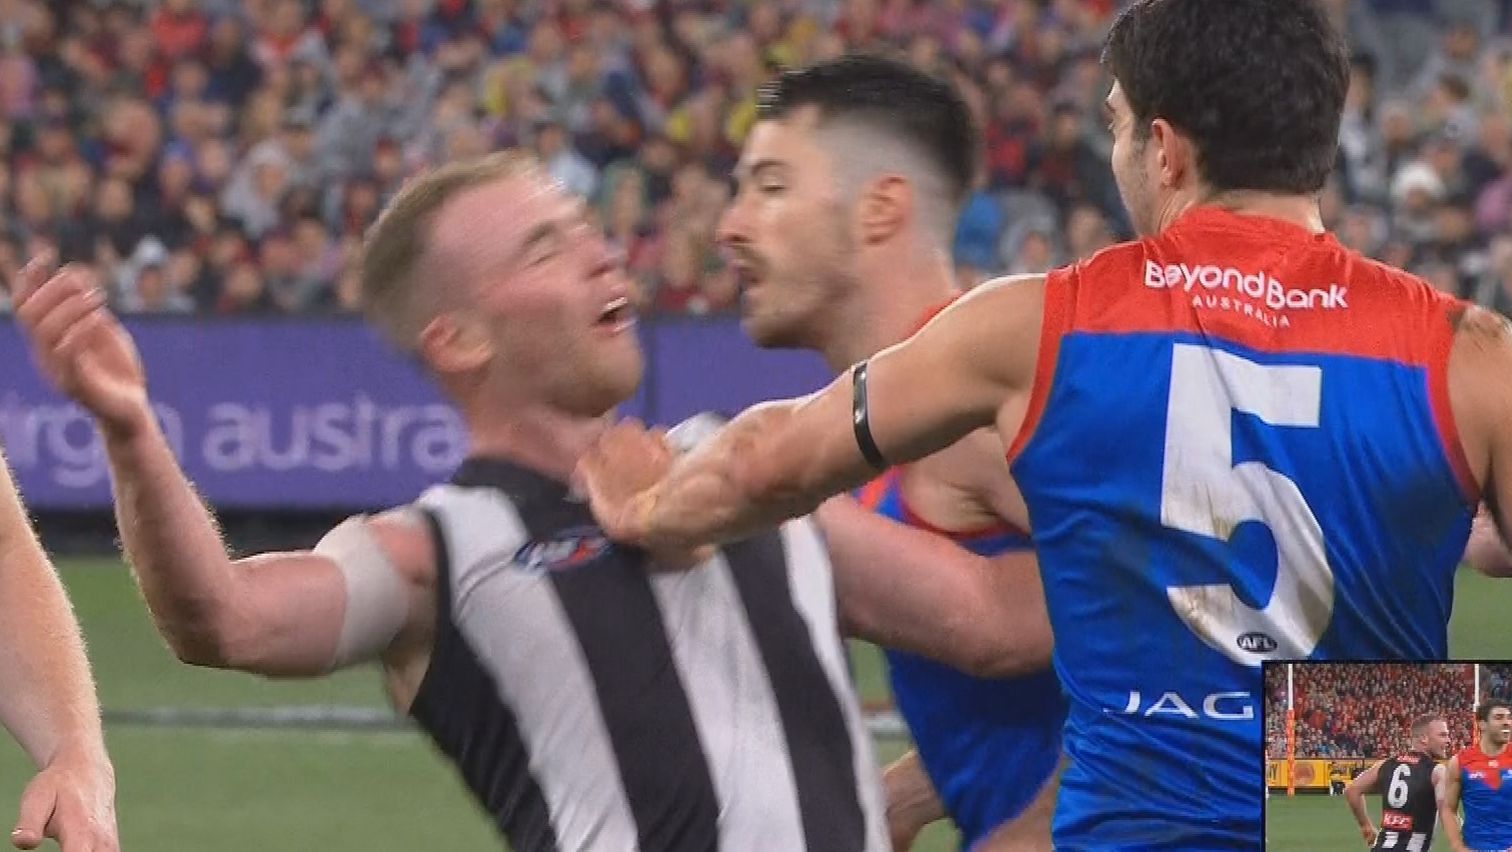 Collingwood&#x27;s Tom Mitchell flopped to the turf after a soft shove from Christian Petracca.